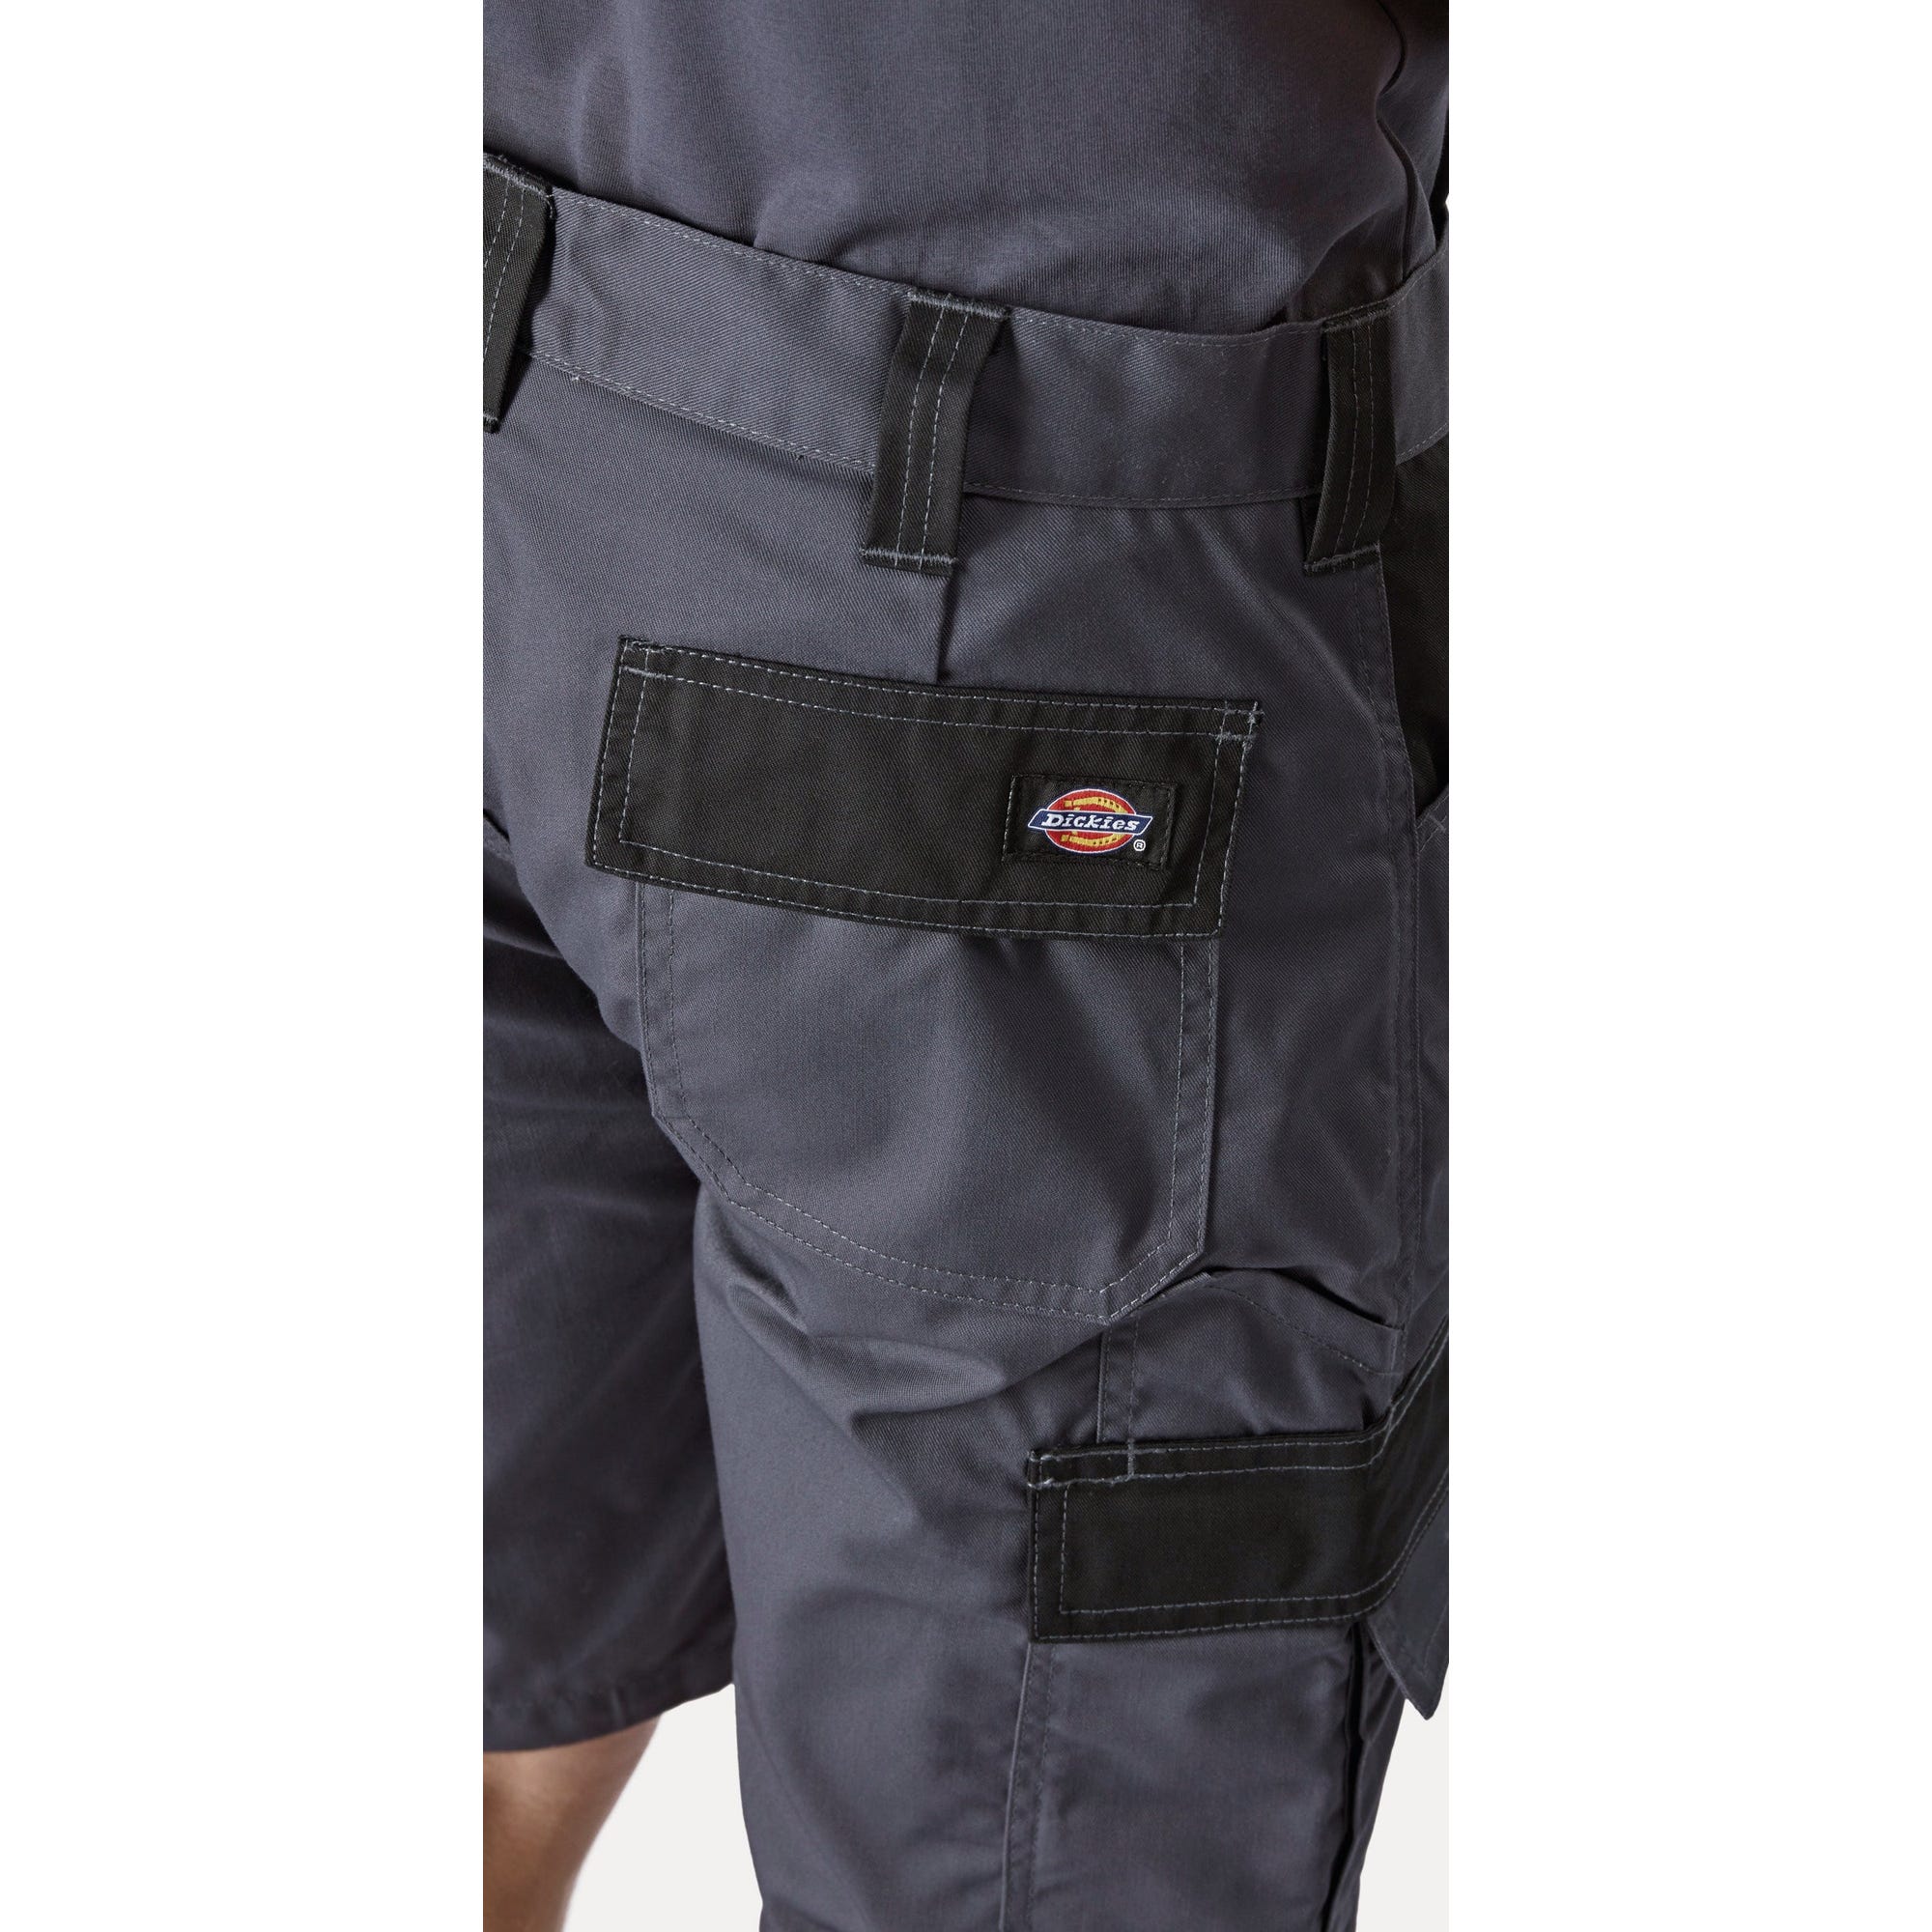 Short Everyday Noir - Dickies - Taille 46 8